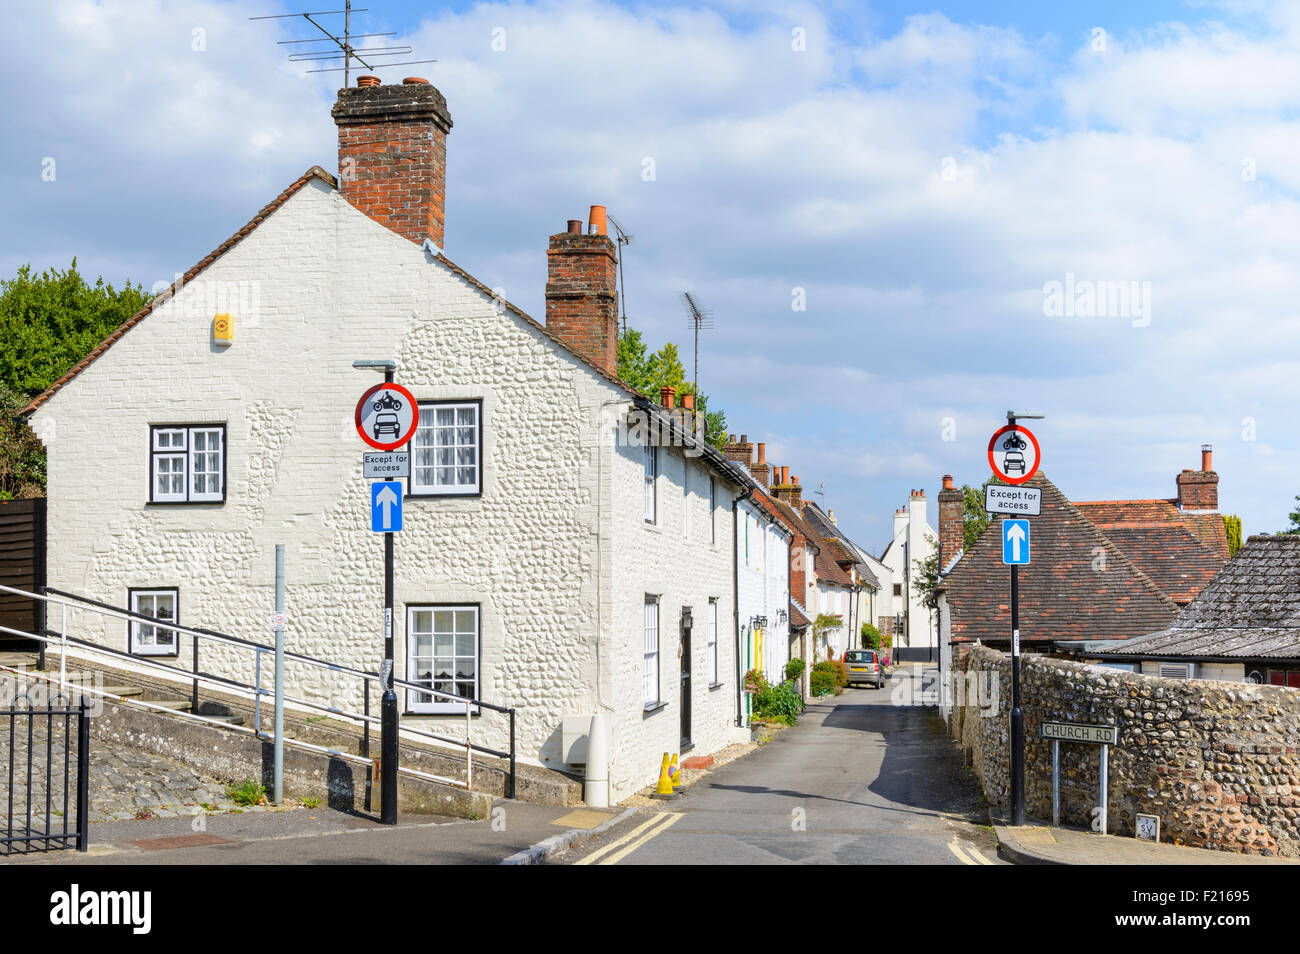 Narrow picturesque street in Angmering Village, West Sussex, England, UK. Stock Photo